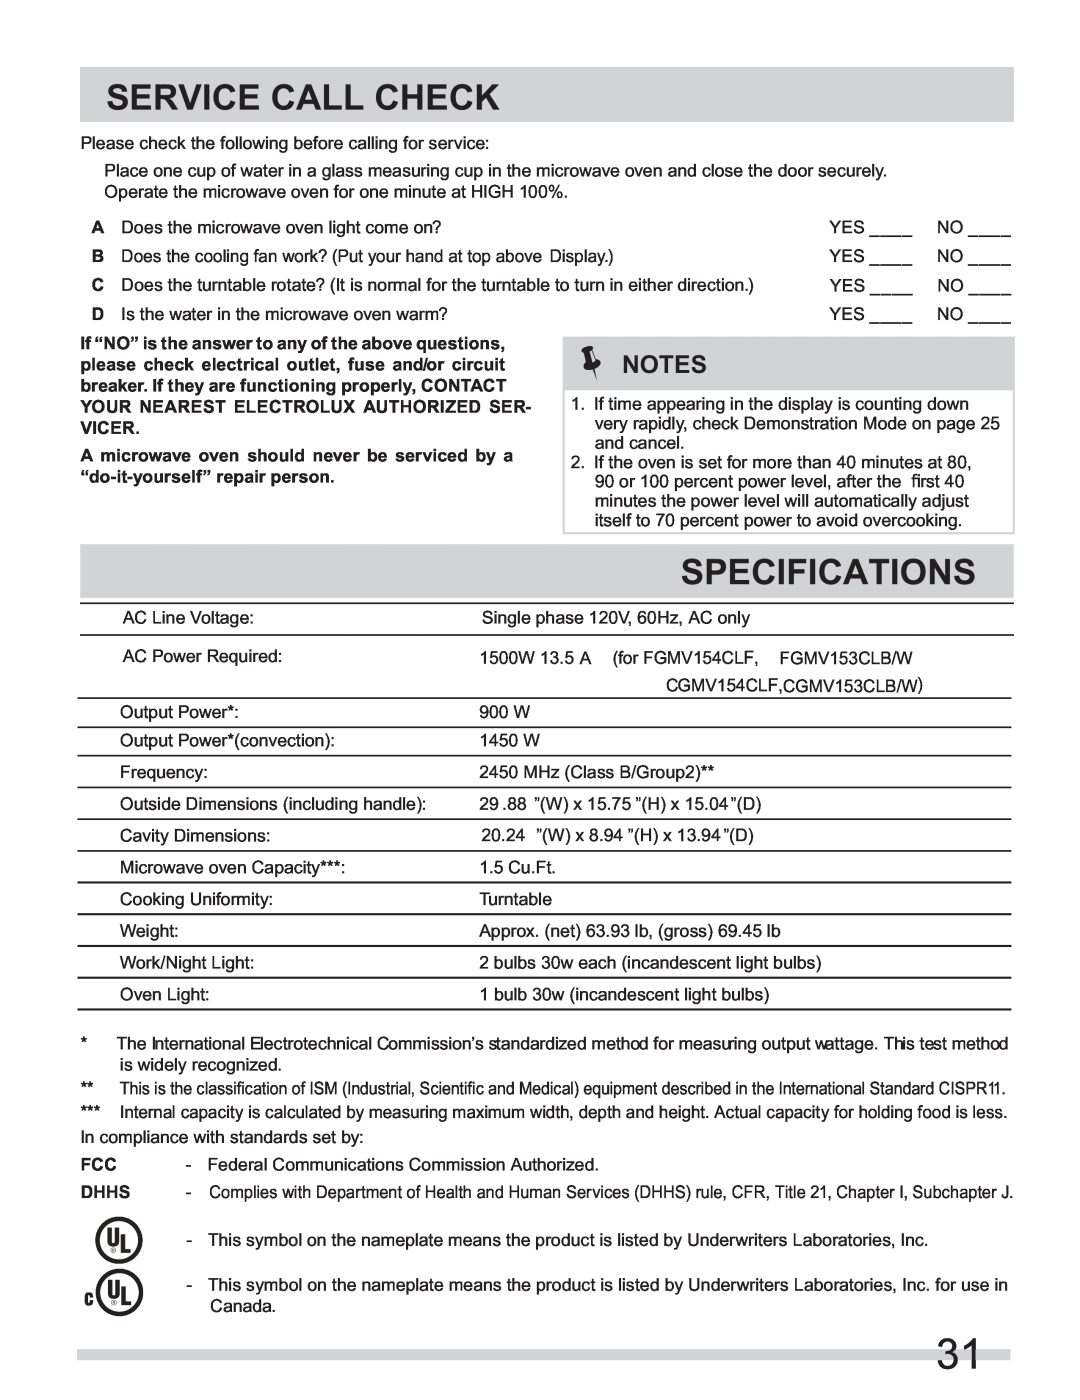 Frigidaire FGMV154CLF Service Call Check, Specifications, If “NO” is the answer to any of the above questions, Vicer 